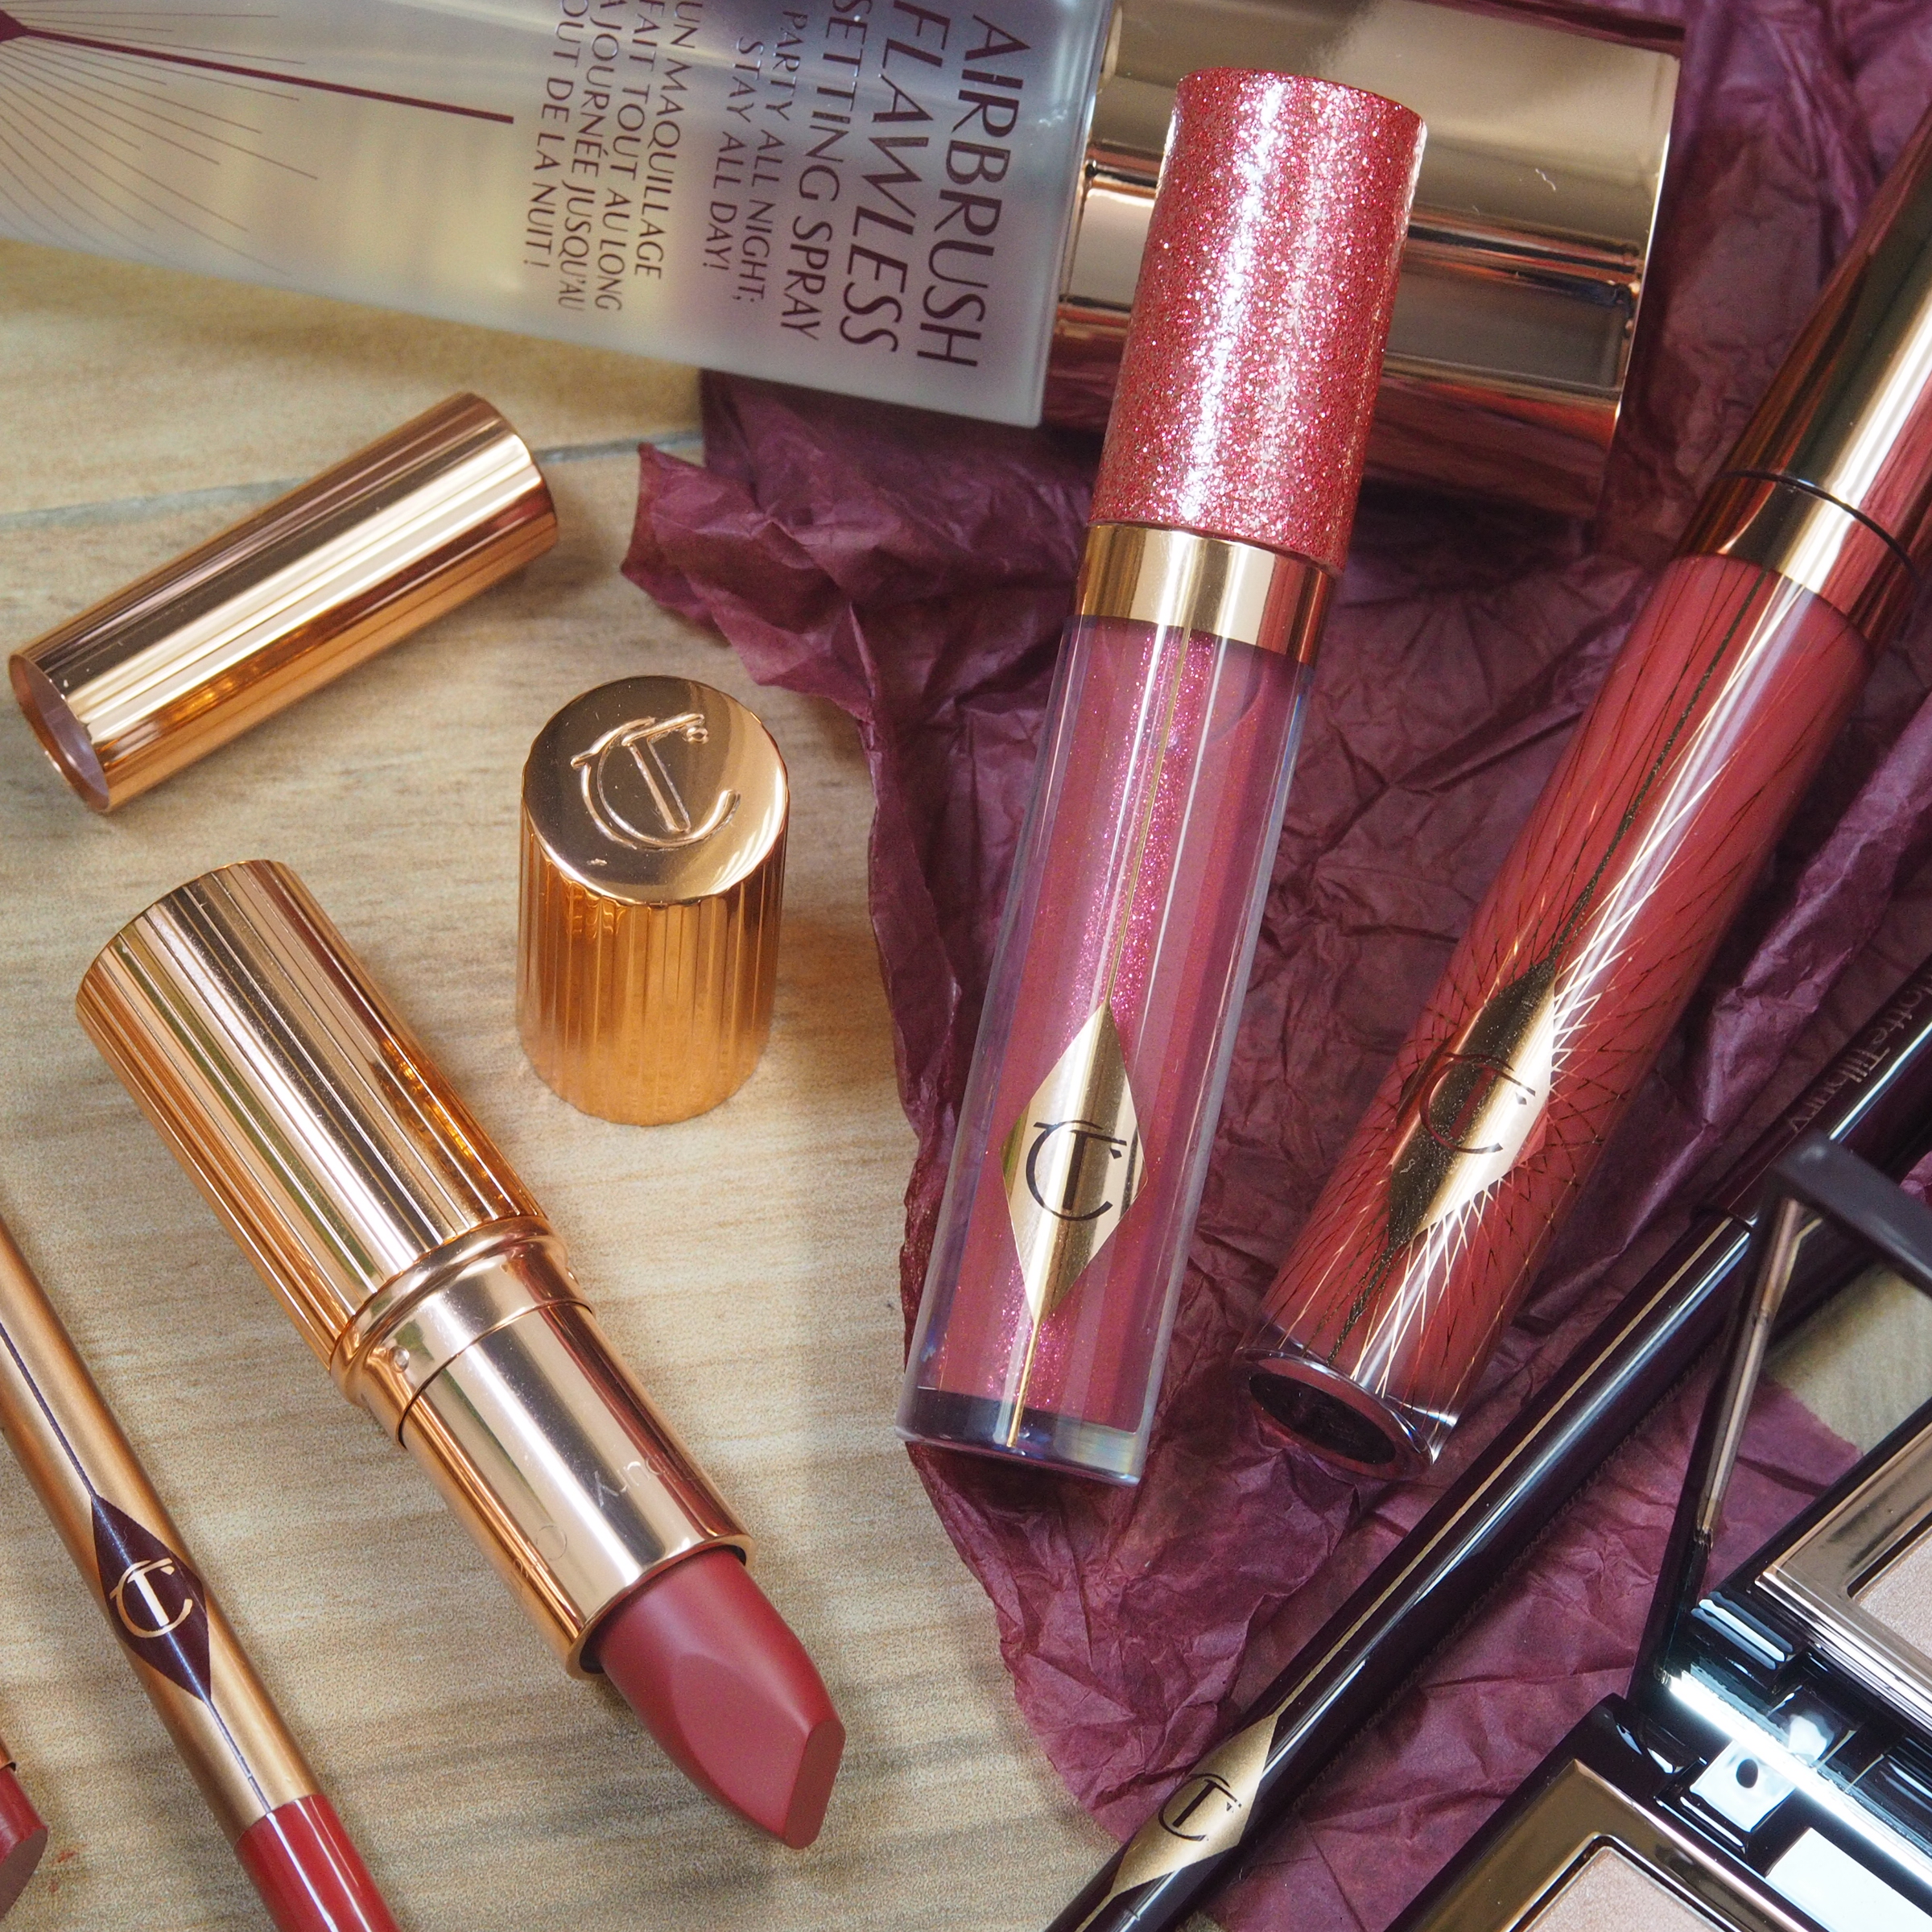 [REVIEW] Charlotte Tilbury ‘Walk of No Shame’ Collection